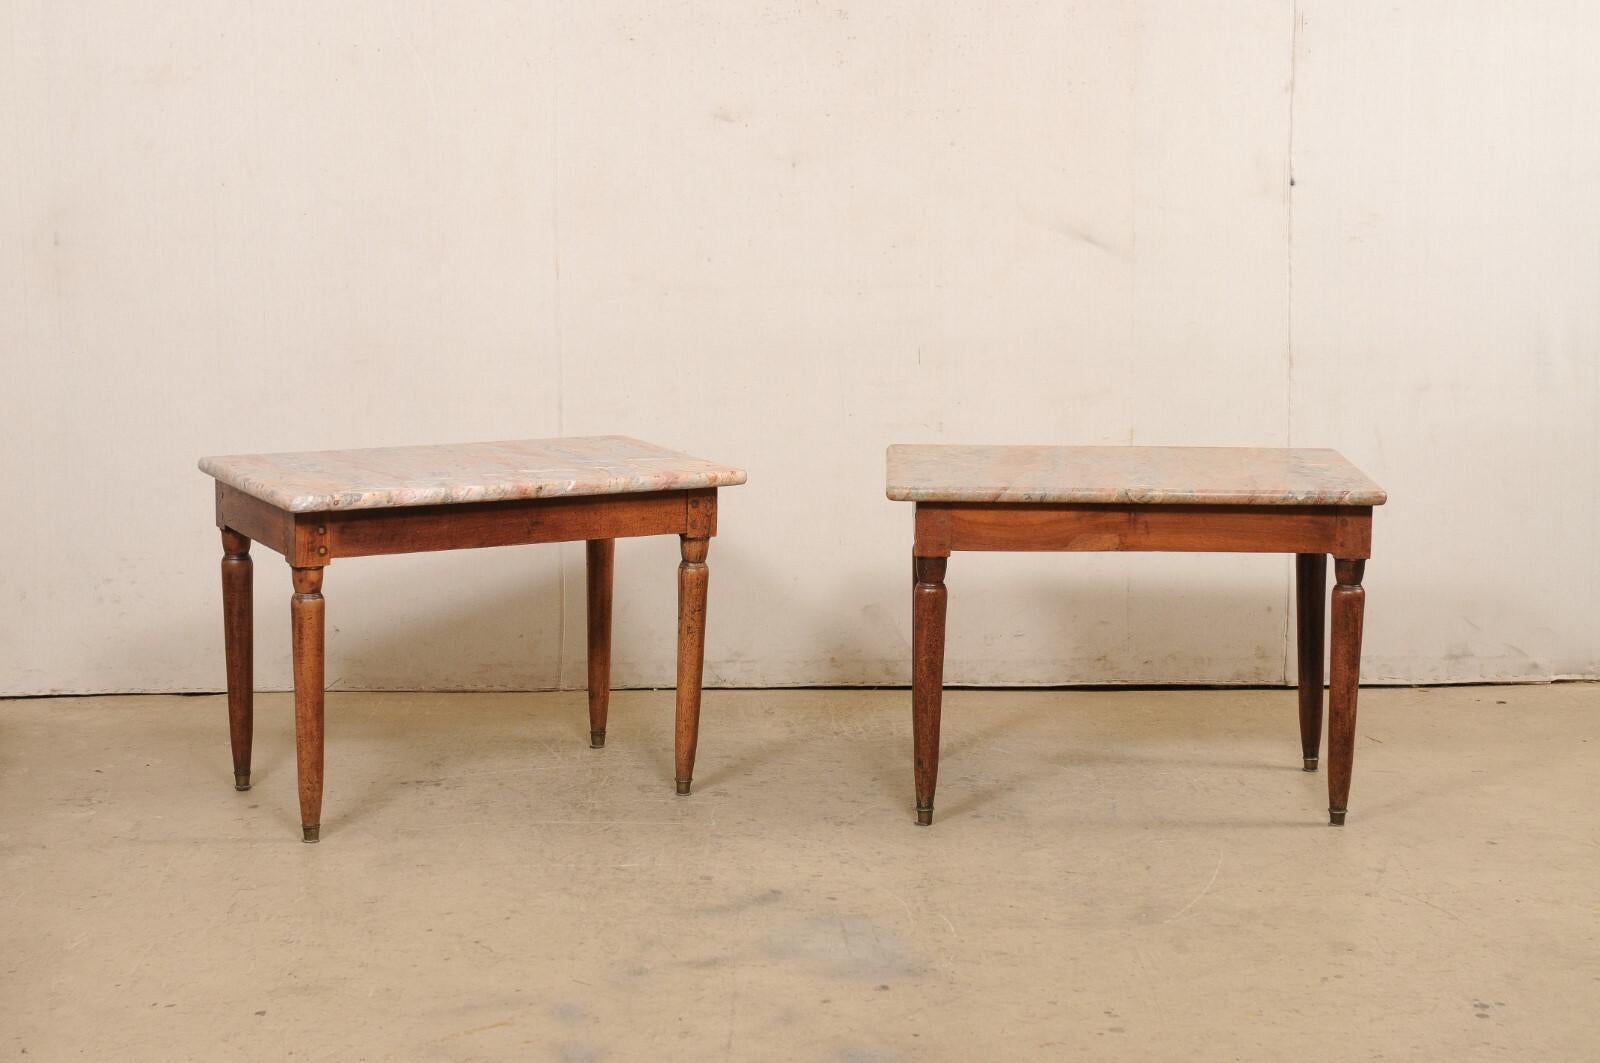 An English pair of marble top occasional tables from the 19th century. These antique tables from England each retain their original, rectangular-shaped marble tops (which are quite beautiful) with softly rounded edges and corners. The marble